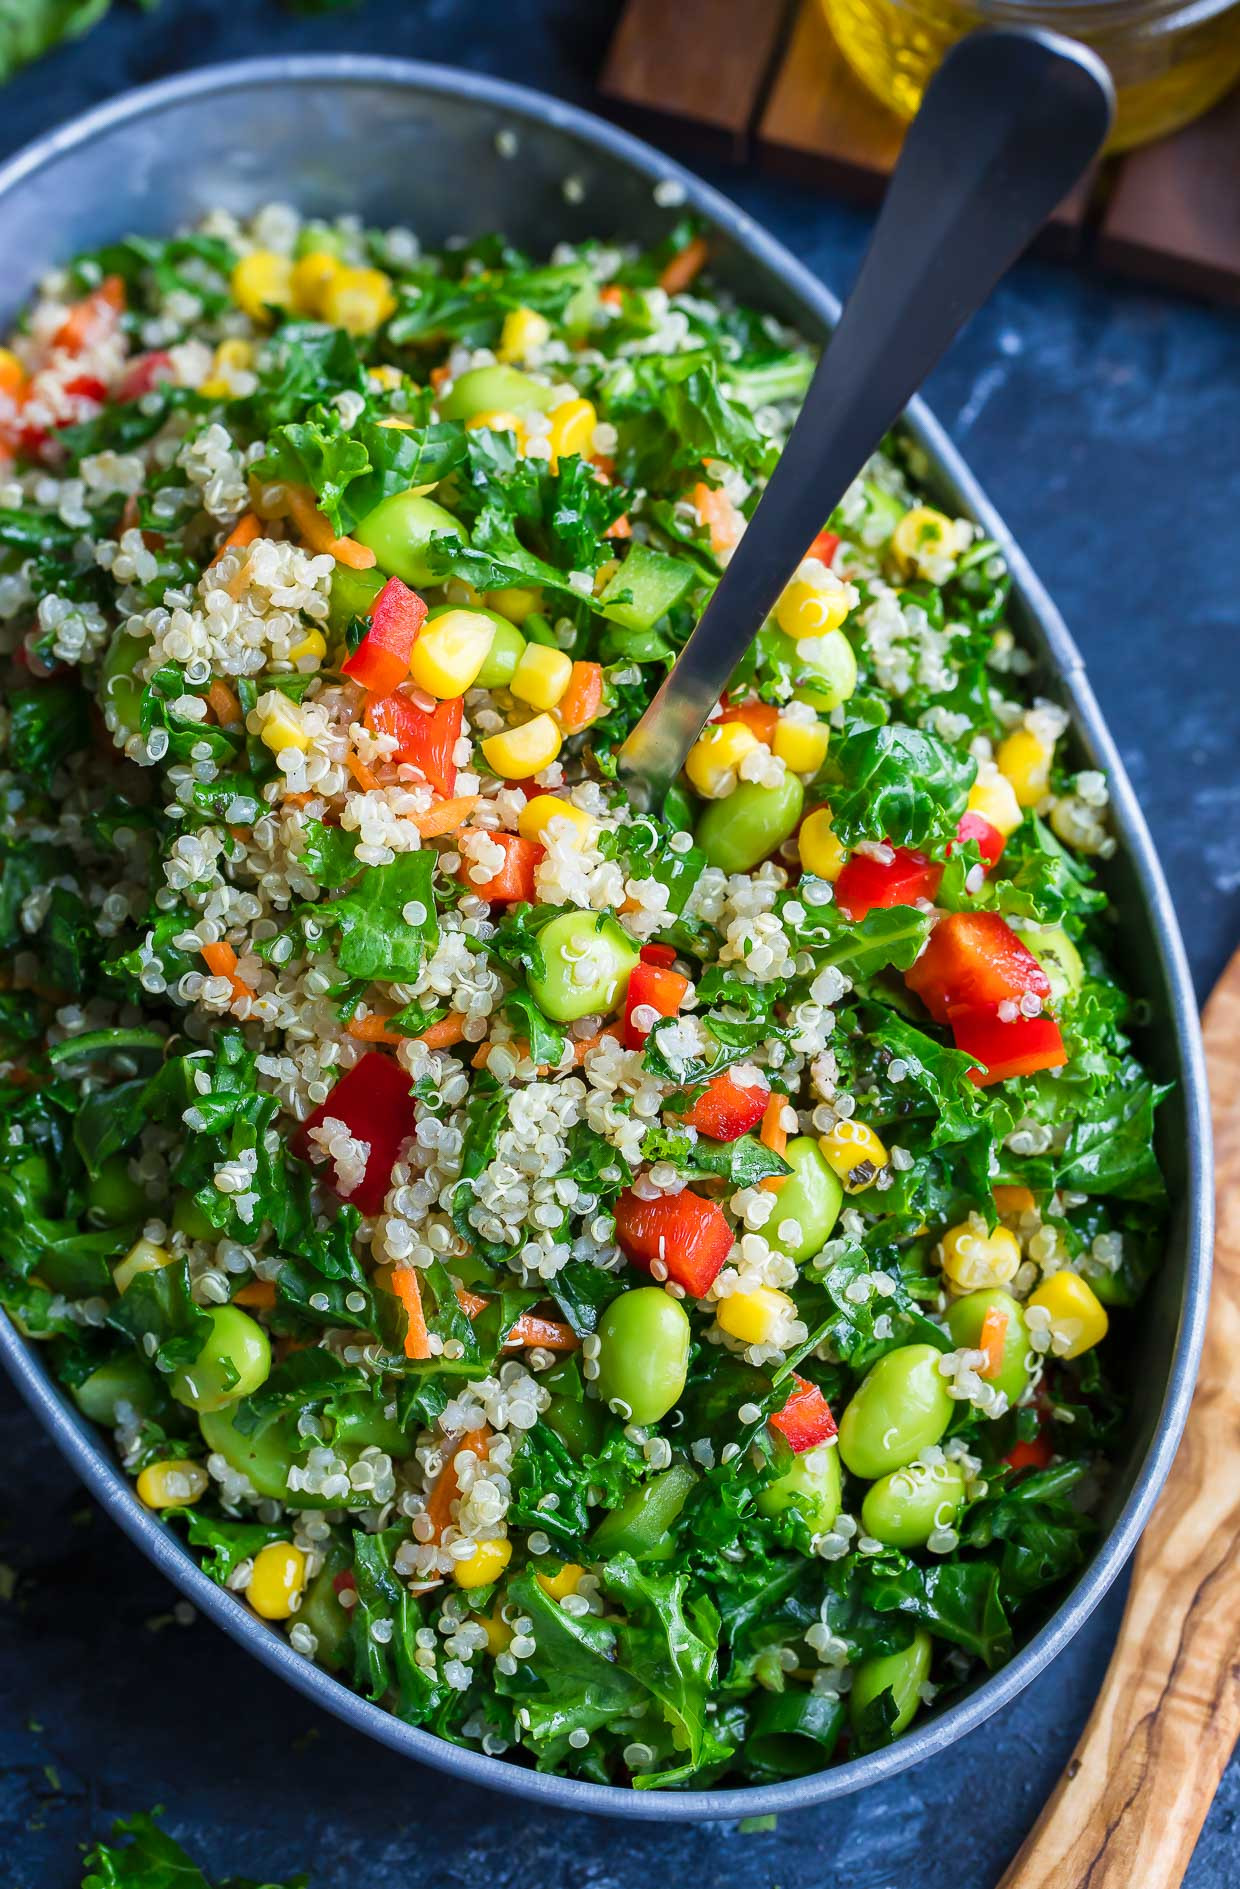 The 20 Best Ideas for Healthy Quinoa Salad - Best Recipes Ideas and ...